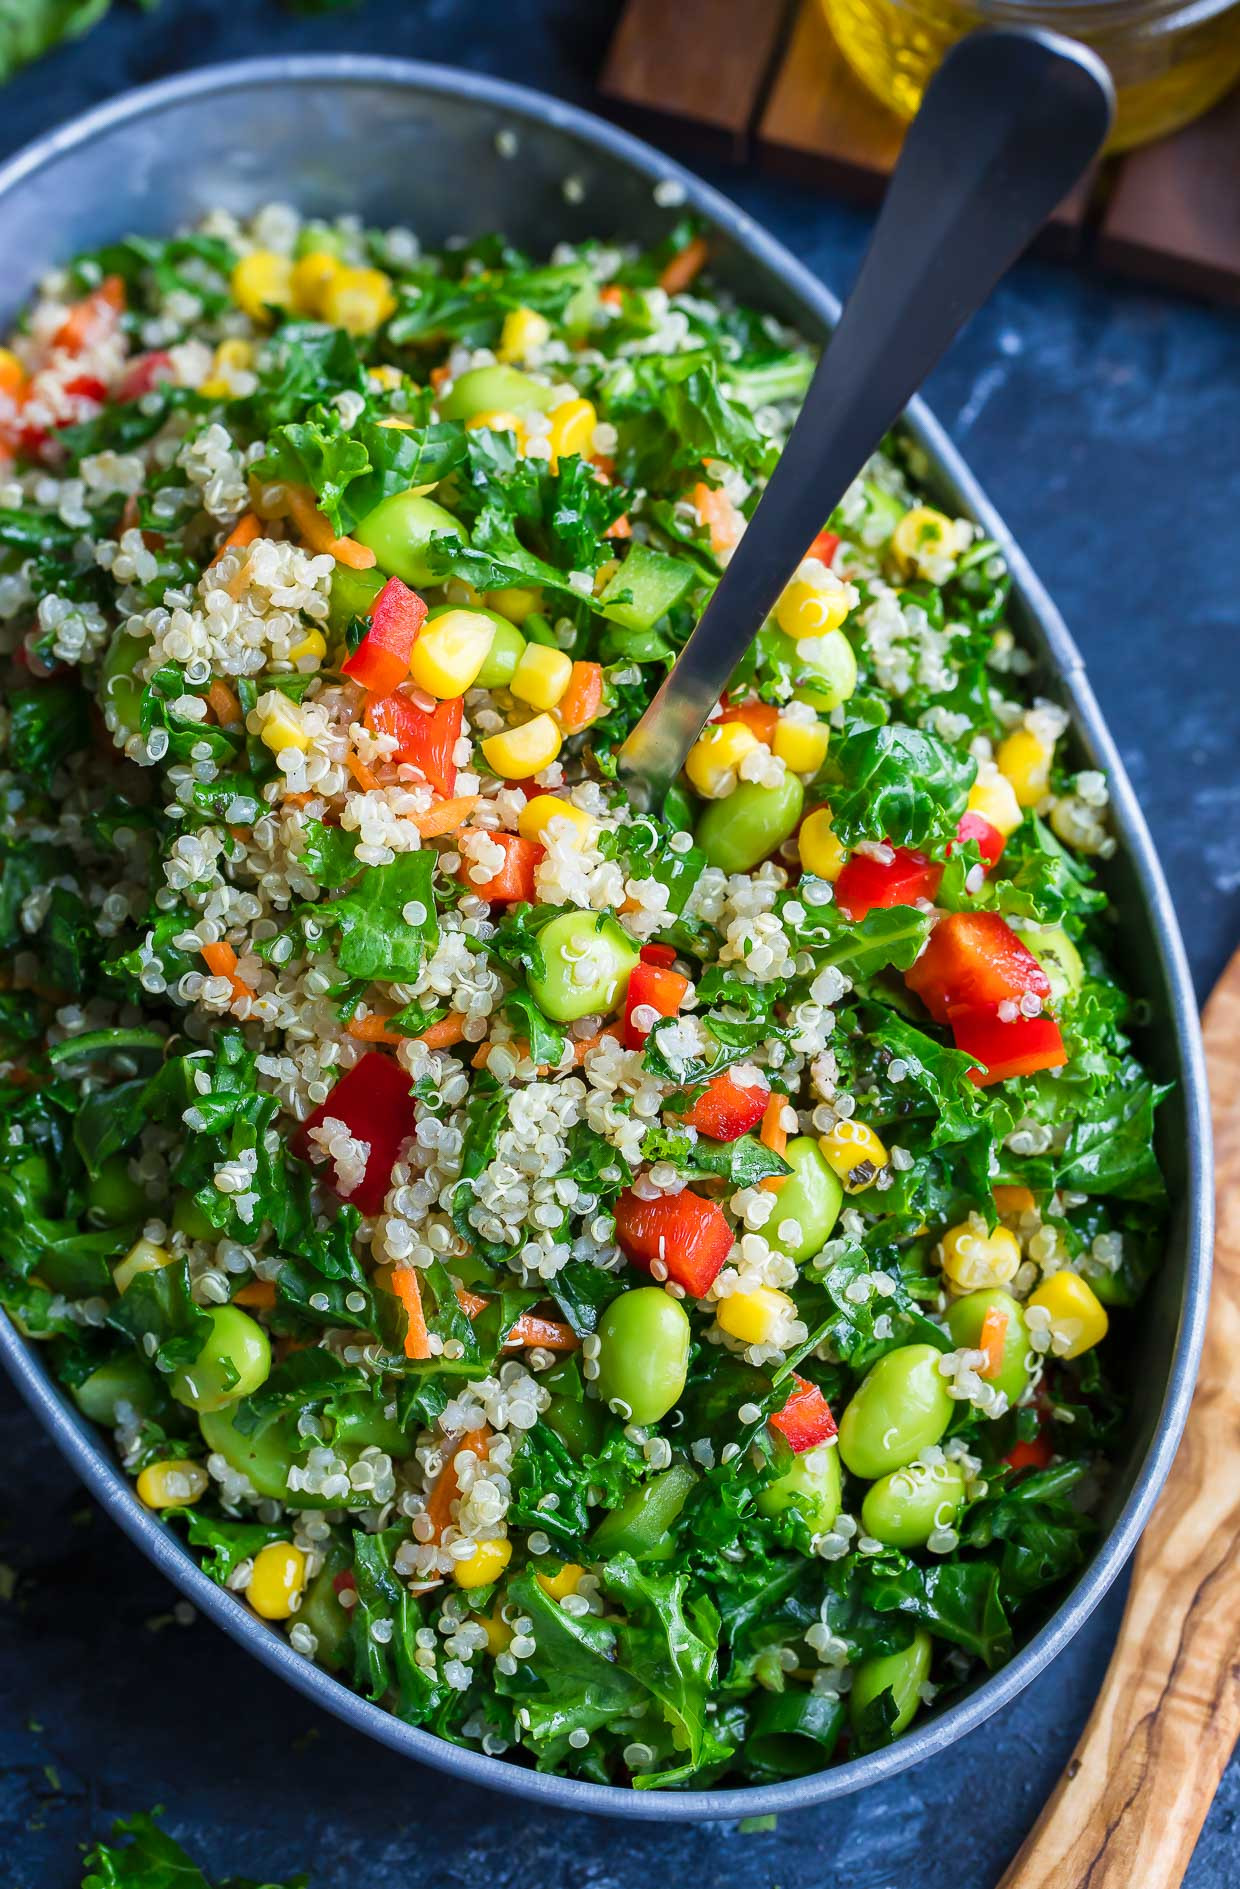 The 20 Best Ideas for Healthy Quinoa Salad - Best Recipes Ideas and ...